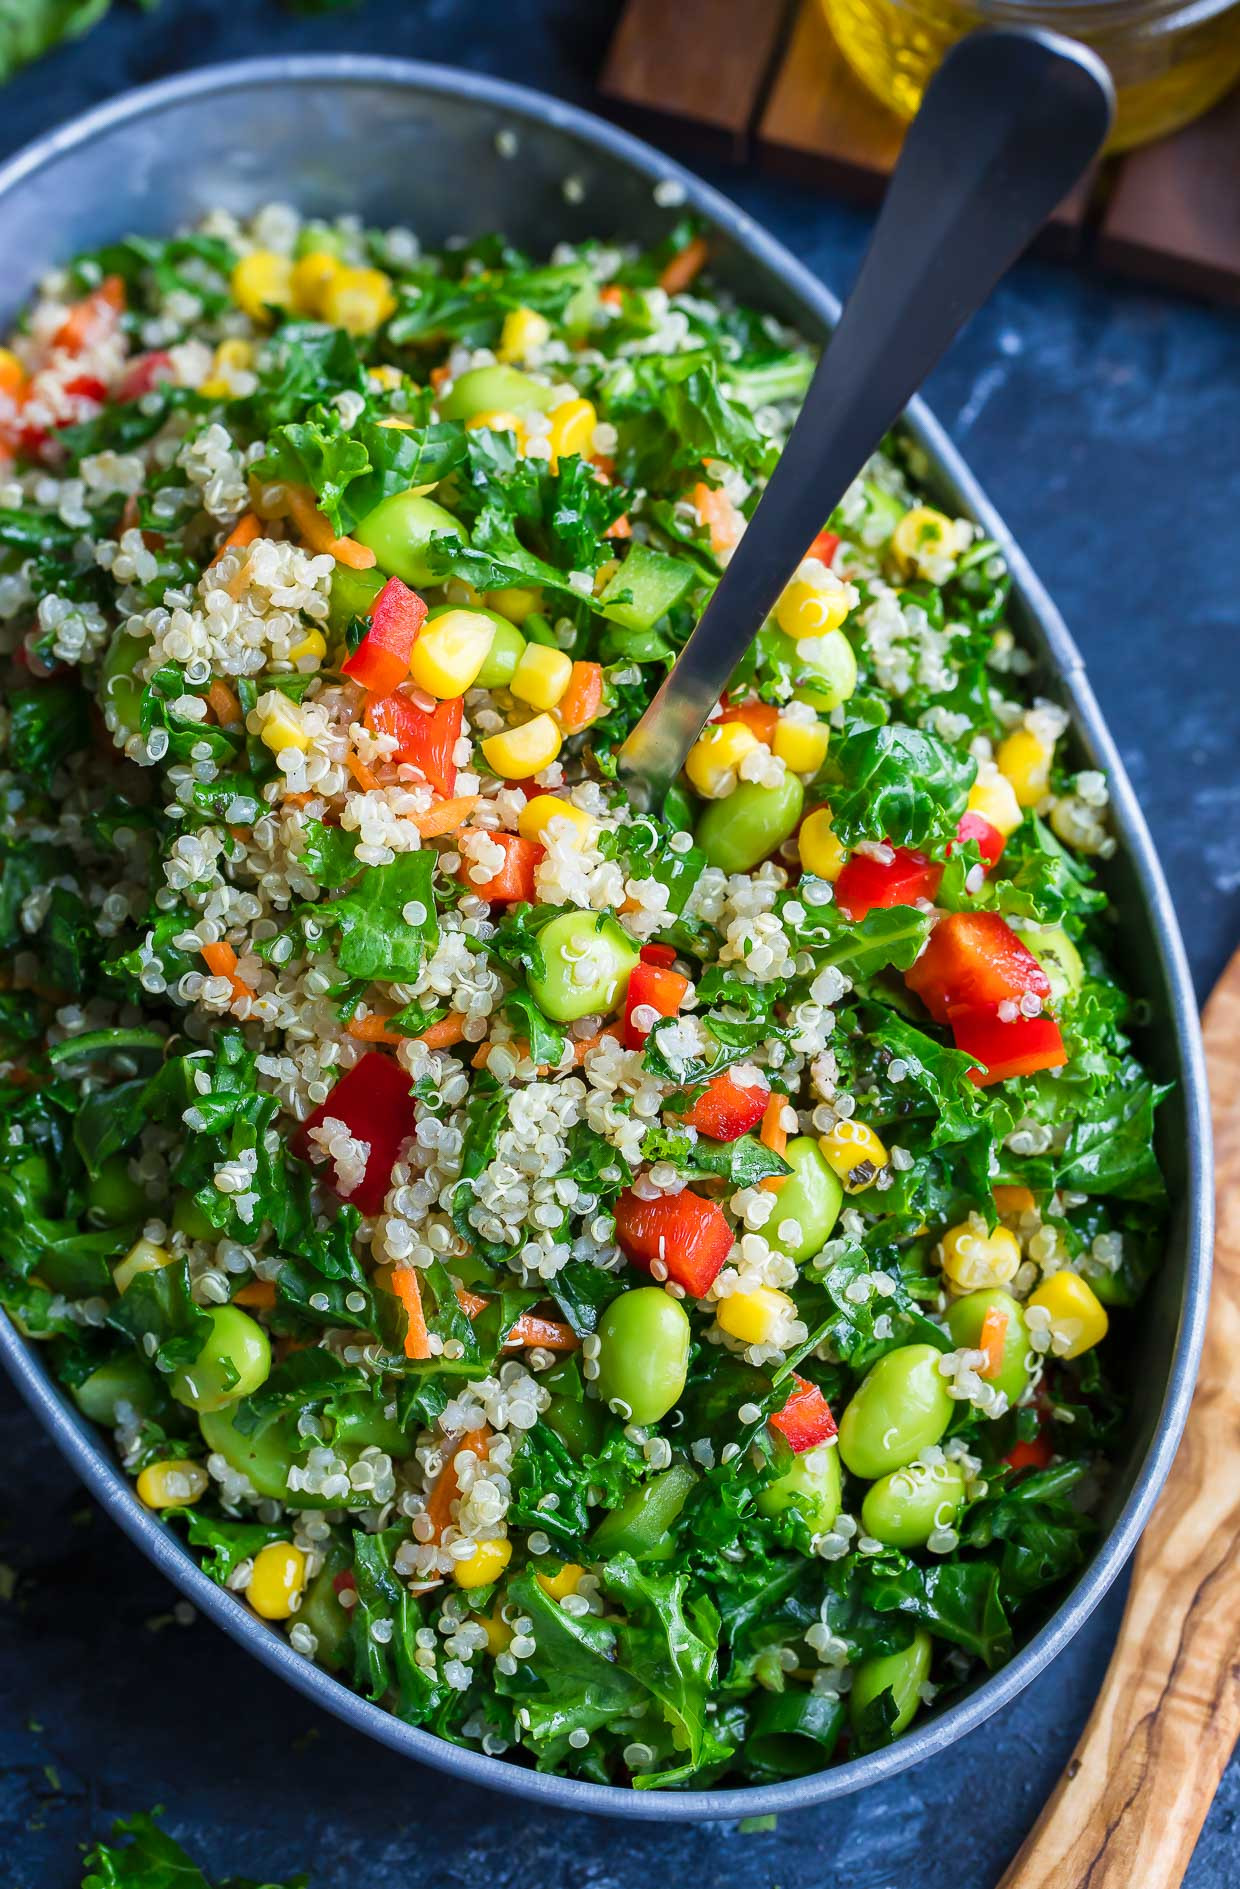 The 20 Best Ideas for Healthy Quinoa Salad - Best Recipes Ideas and ...